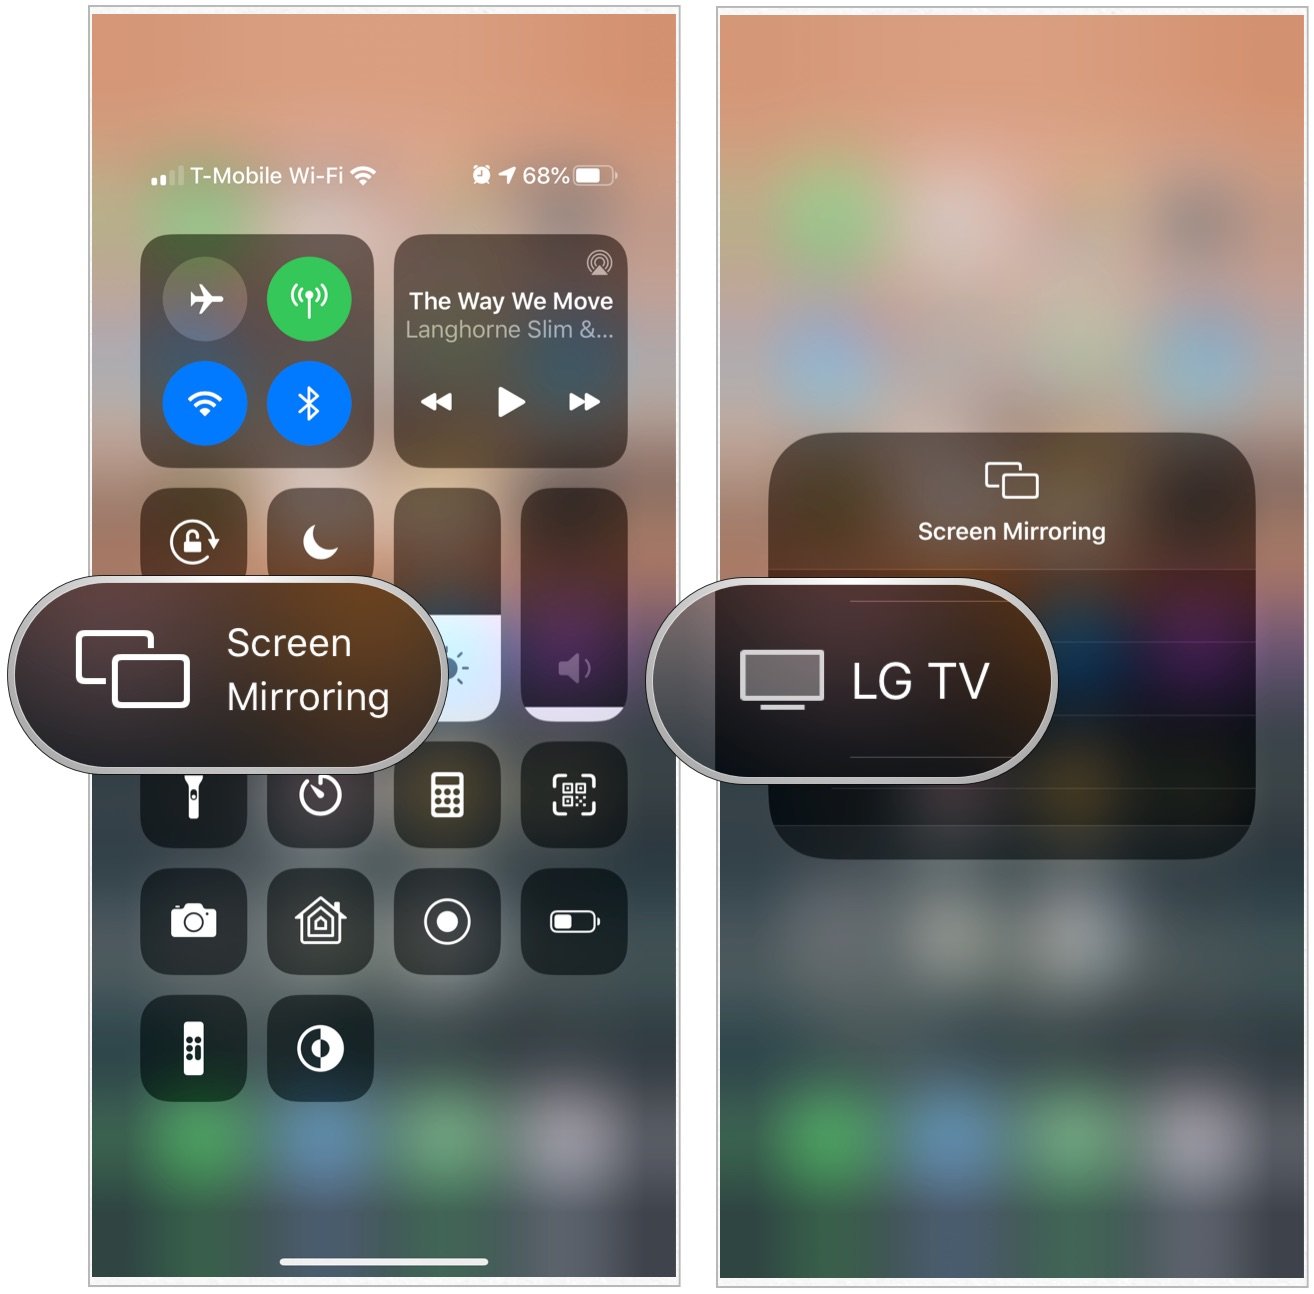 Smart Tvs That Support Airplay 2, How To Stop Screen Mirroring On Lg Tv